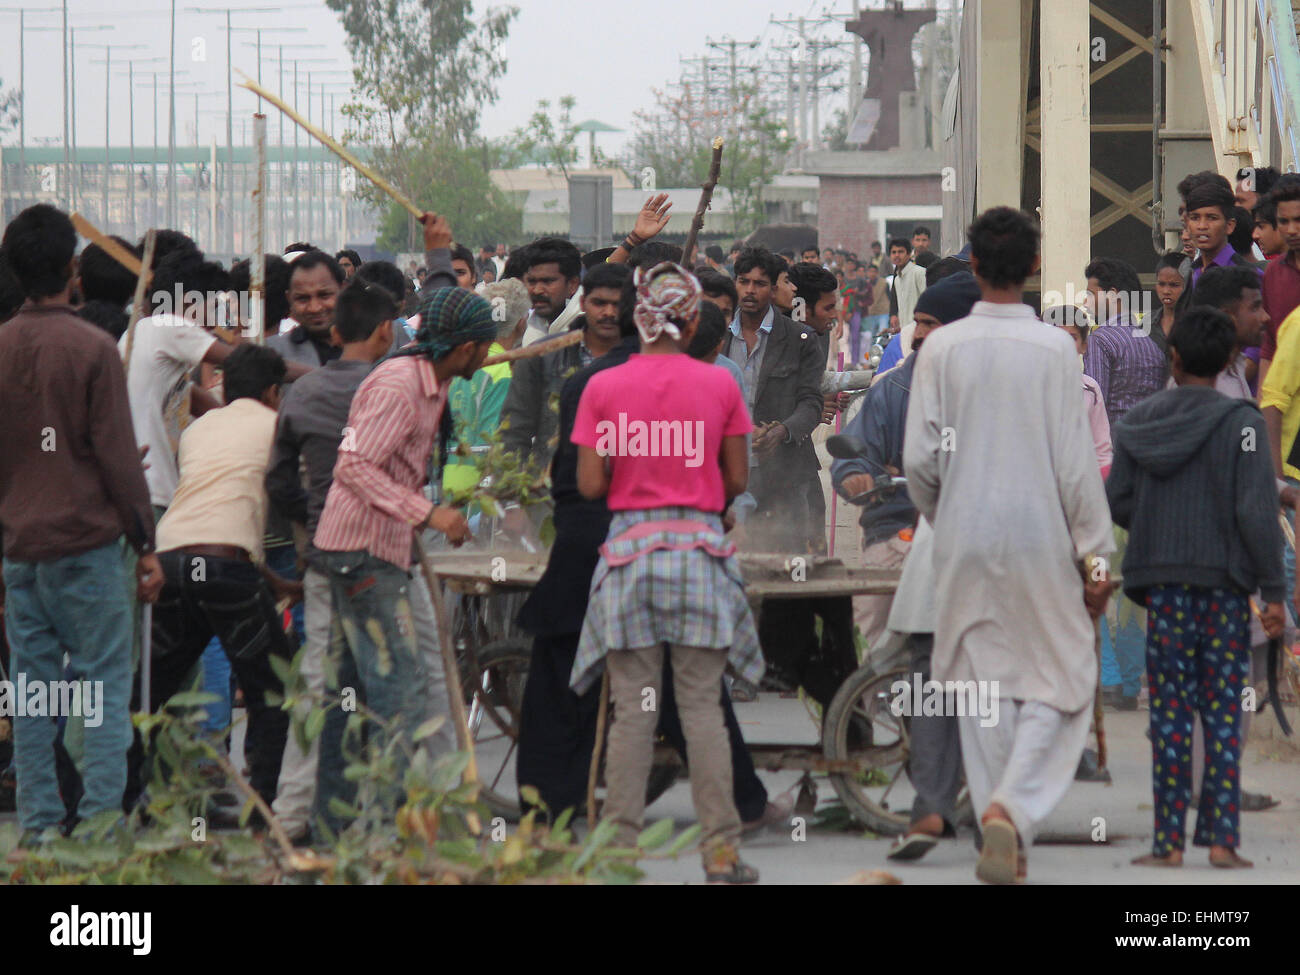 Lahore, Pakistan. 15th March, 2015. People around bringing small sticks and halt other vehicles to pass the way. There are bunch of Pakistani gather around the burning bodies of what the mob called suspects in aiding the suicide bombers nearby the scene of an attack on a church, killing at least 11 worshipers and wounding several others, officials said, in the latest attack against religious minorities. An angry mob later lynched two people they accused of aiding the suicide bombers outside the churches, a spokesman for the provincial government said. Credit:  PACIFIC PRESS/Alamy Live News Stock Photo